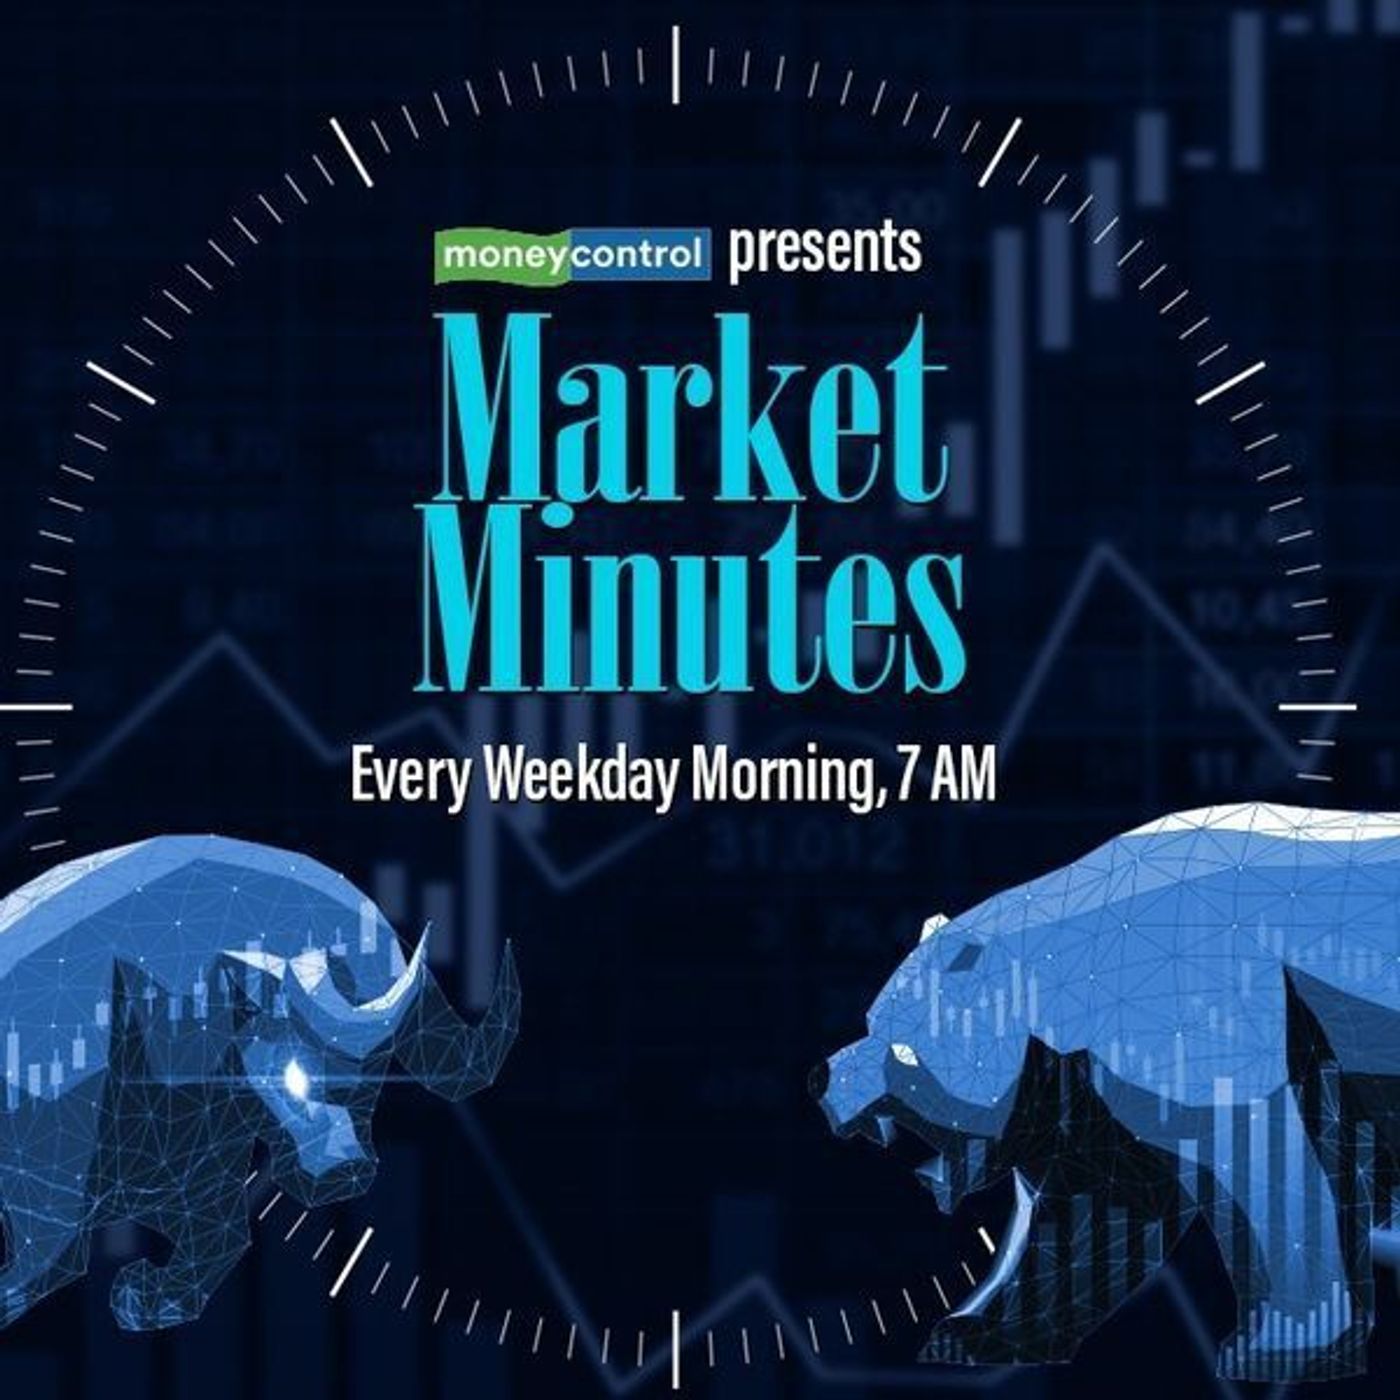 4162: US Fed Minutes, revival in private capex, positive Q3 earnings: Will these factors help Nifty set new highs or will it fall in trade? | Market Minutes